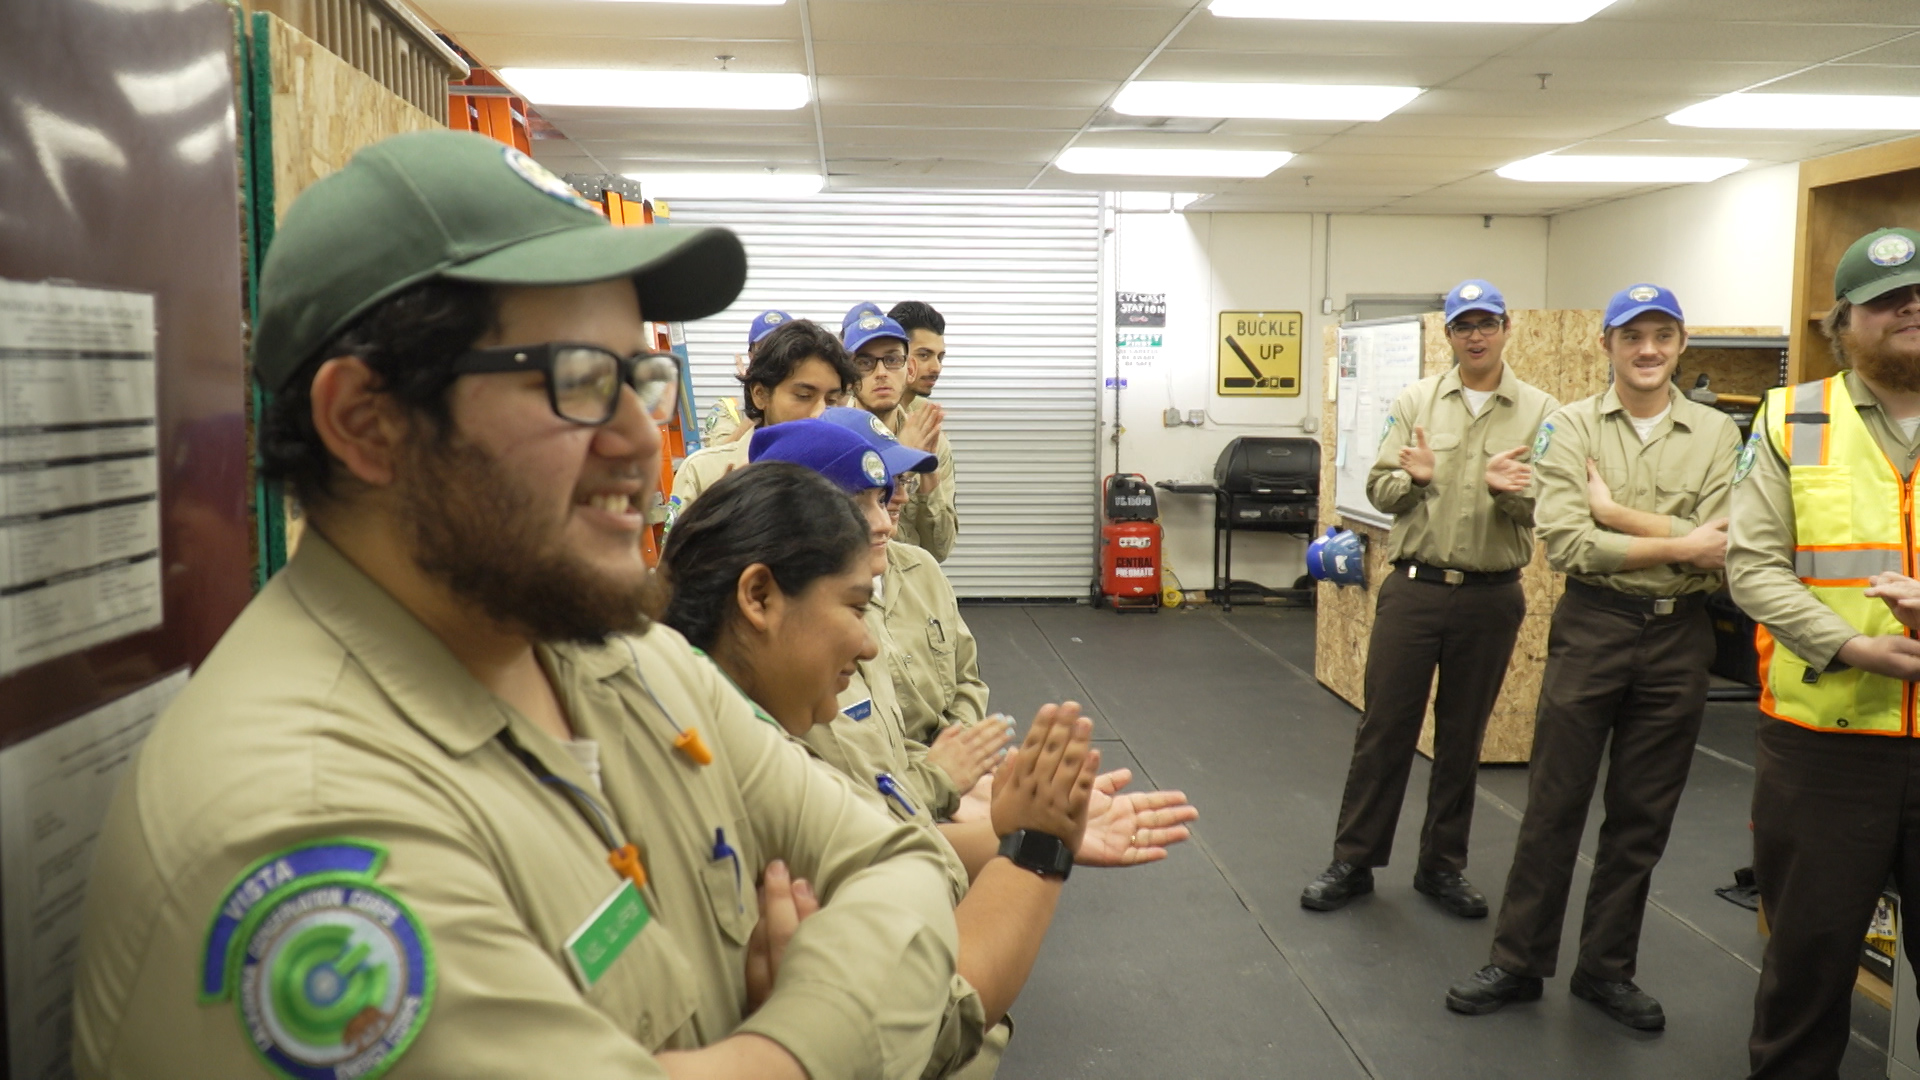 corpsmembers applauding during afternoon roll call in supply room